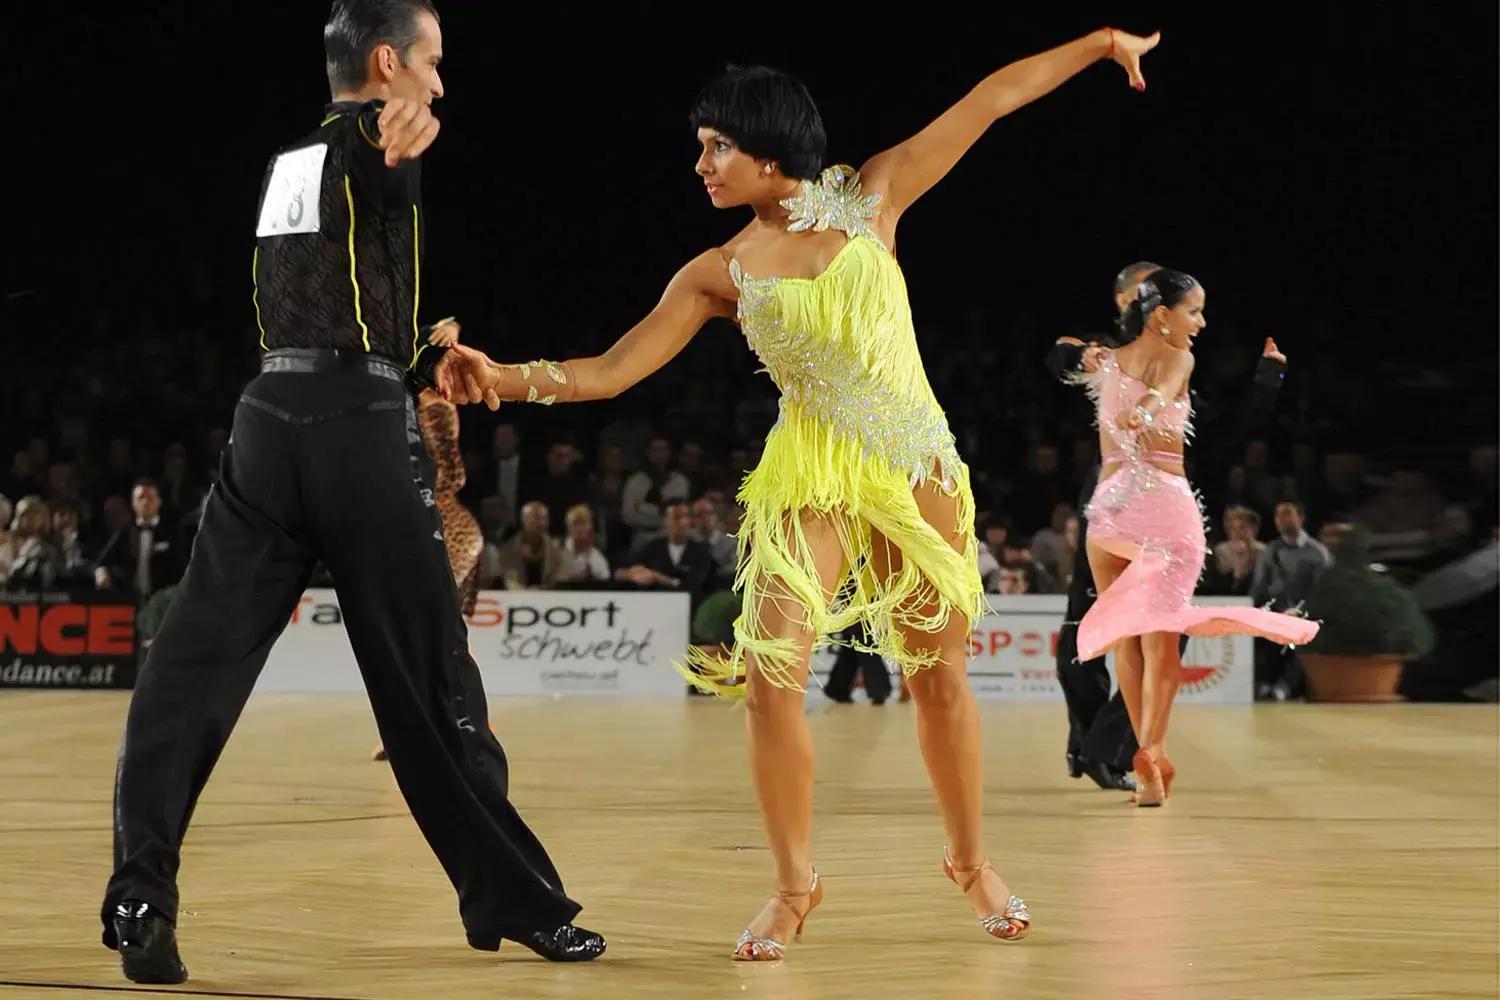 Long term Ballroom dance training may promote empathic concern